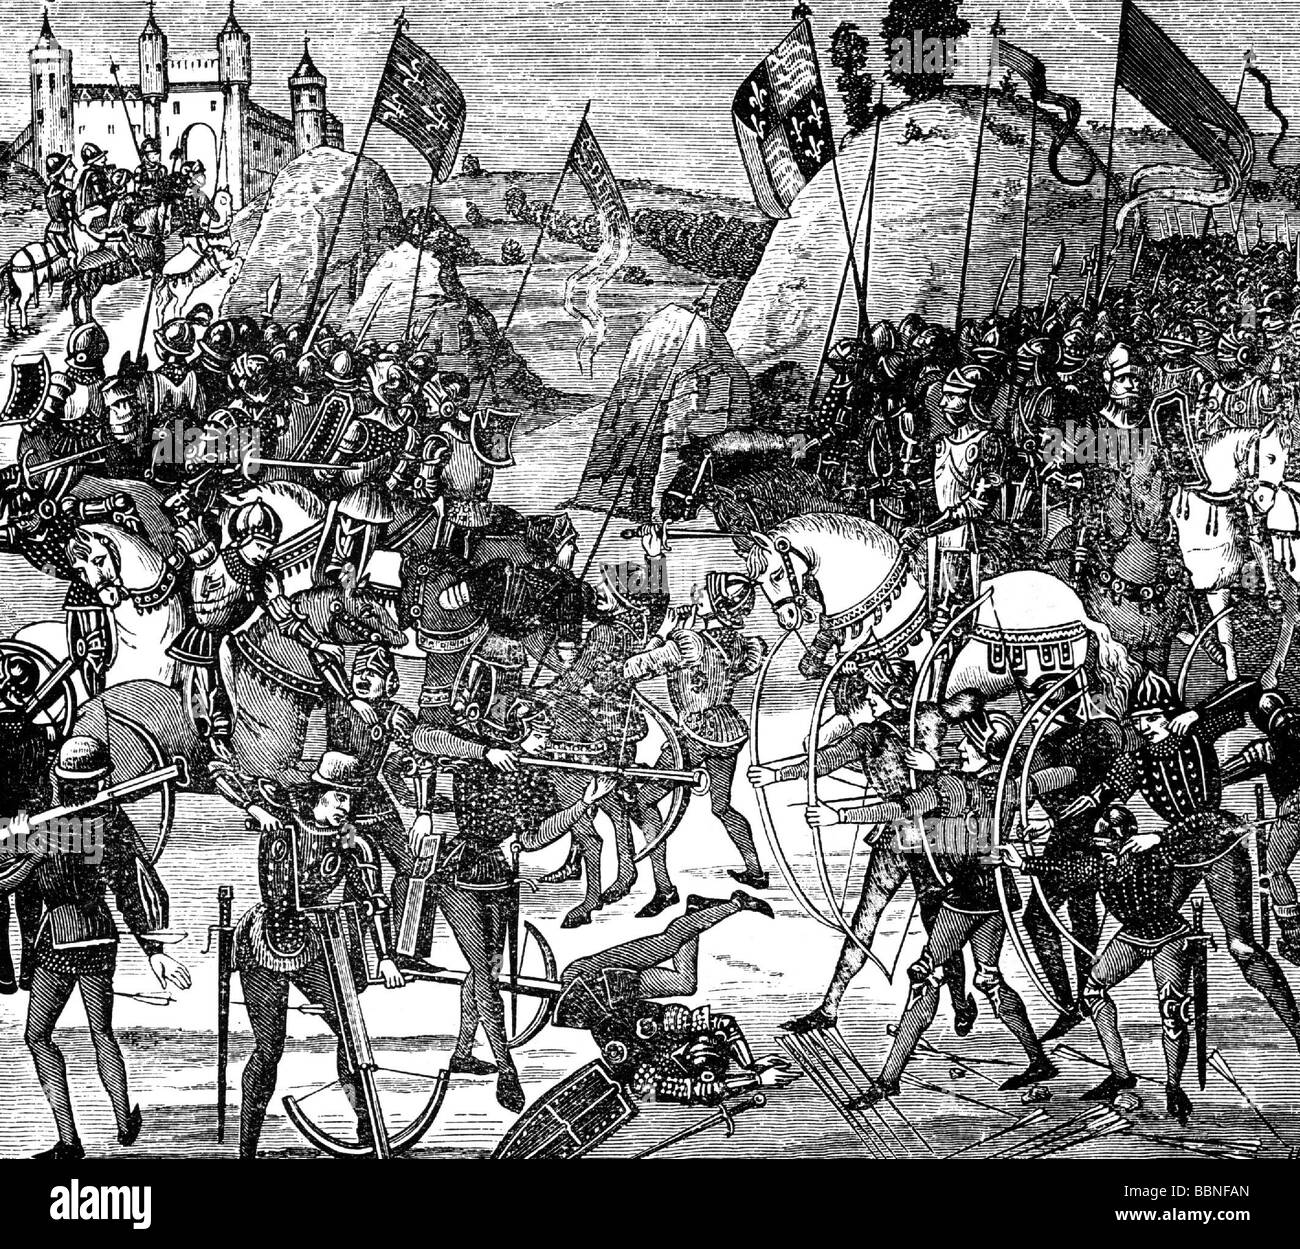 events, Hundred Years' War 1337 - 1453, Battle of Crecy, 26.8.1346, Chronicles of Jean Froissart, 14th century, Paris National Library, wood engraving, 19th century, middle ages, English, French, England, France, kinghts, archrs, crossbowmen, longbow, mediaeval warfare, crossbow, historic, historical, medieval, people, Stock Photo